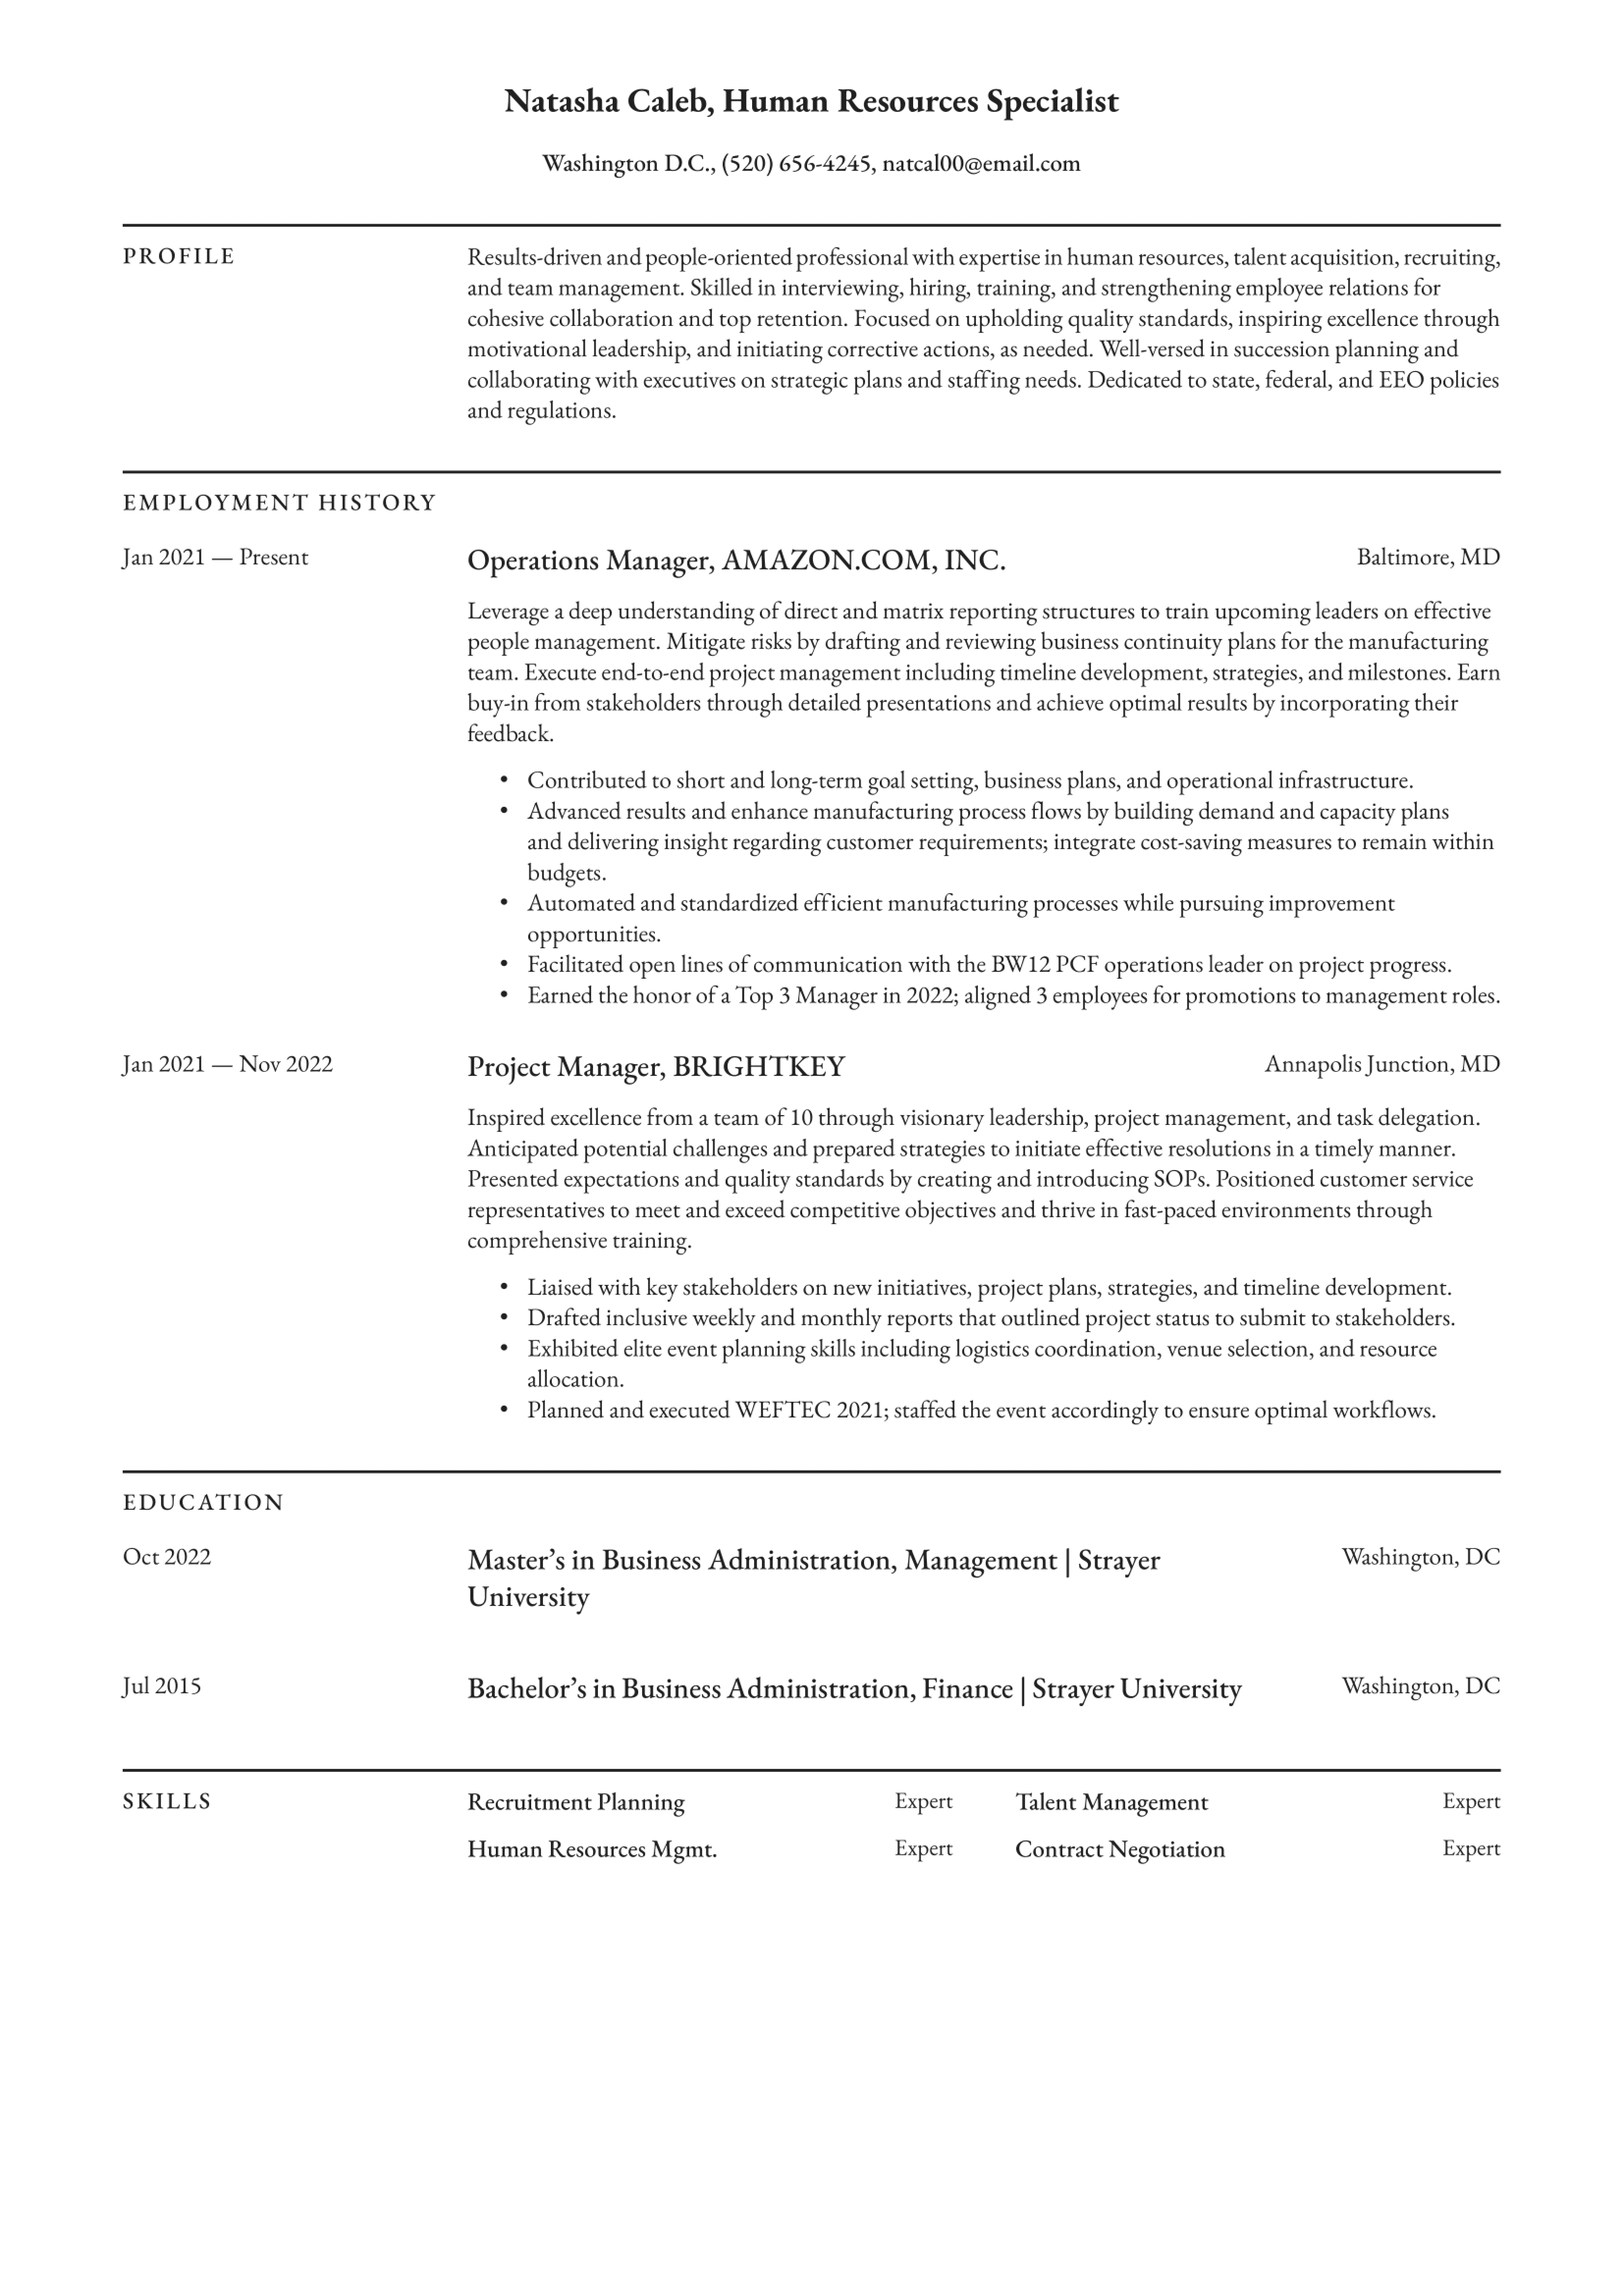 human-resources-specialist-resume-example.png